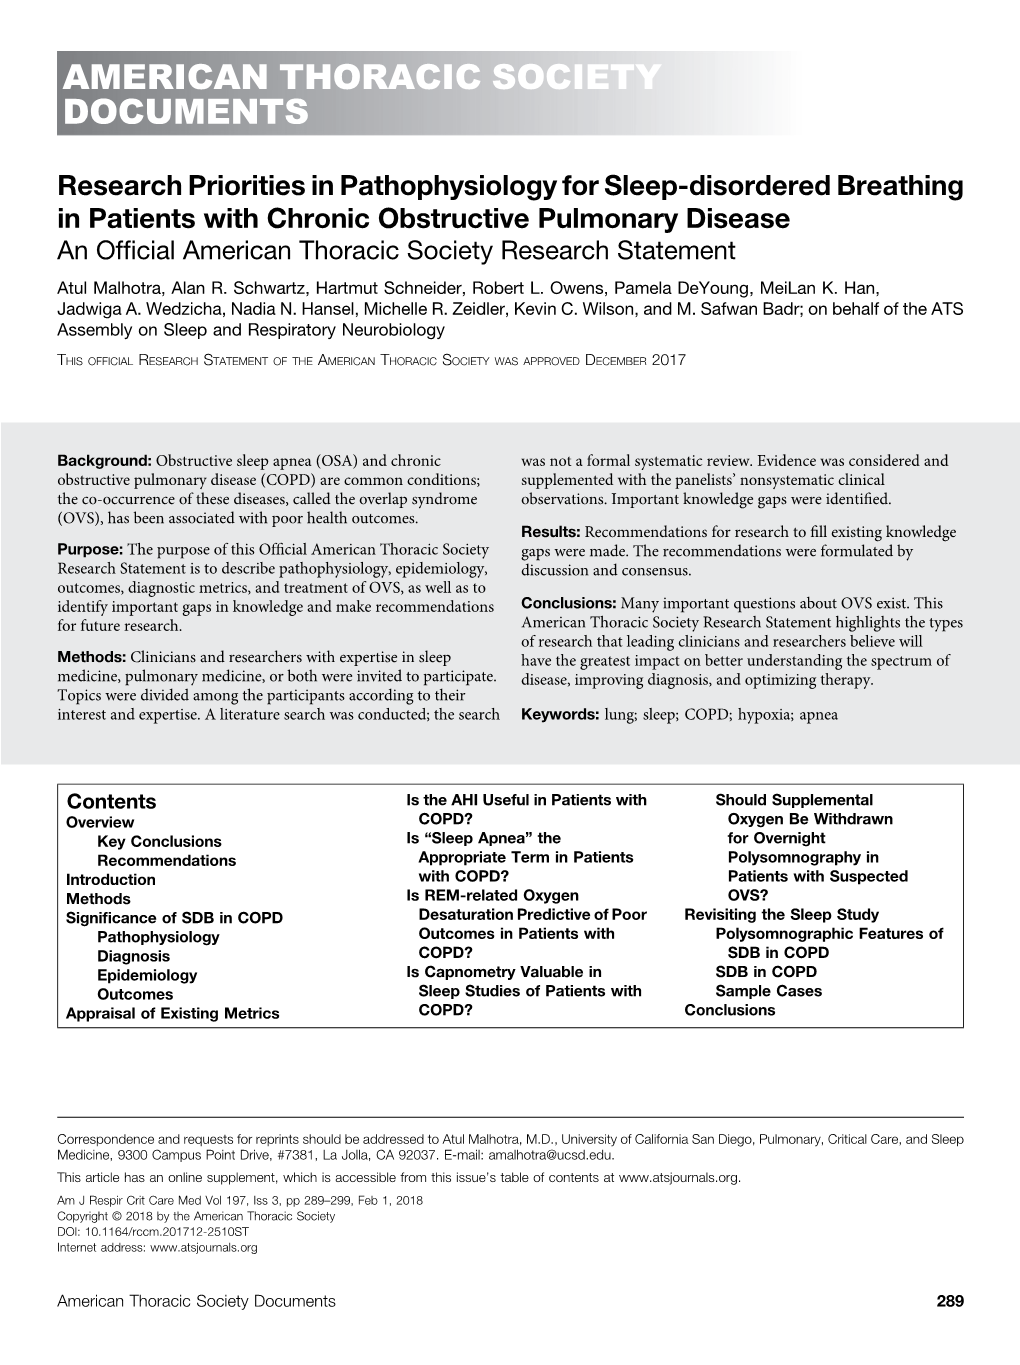 Research Priorities in Pathophysiology for Sleep-Disordered Breathing in Patients with Chronic Obstructive Pulmonary Disease. An